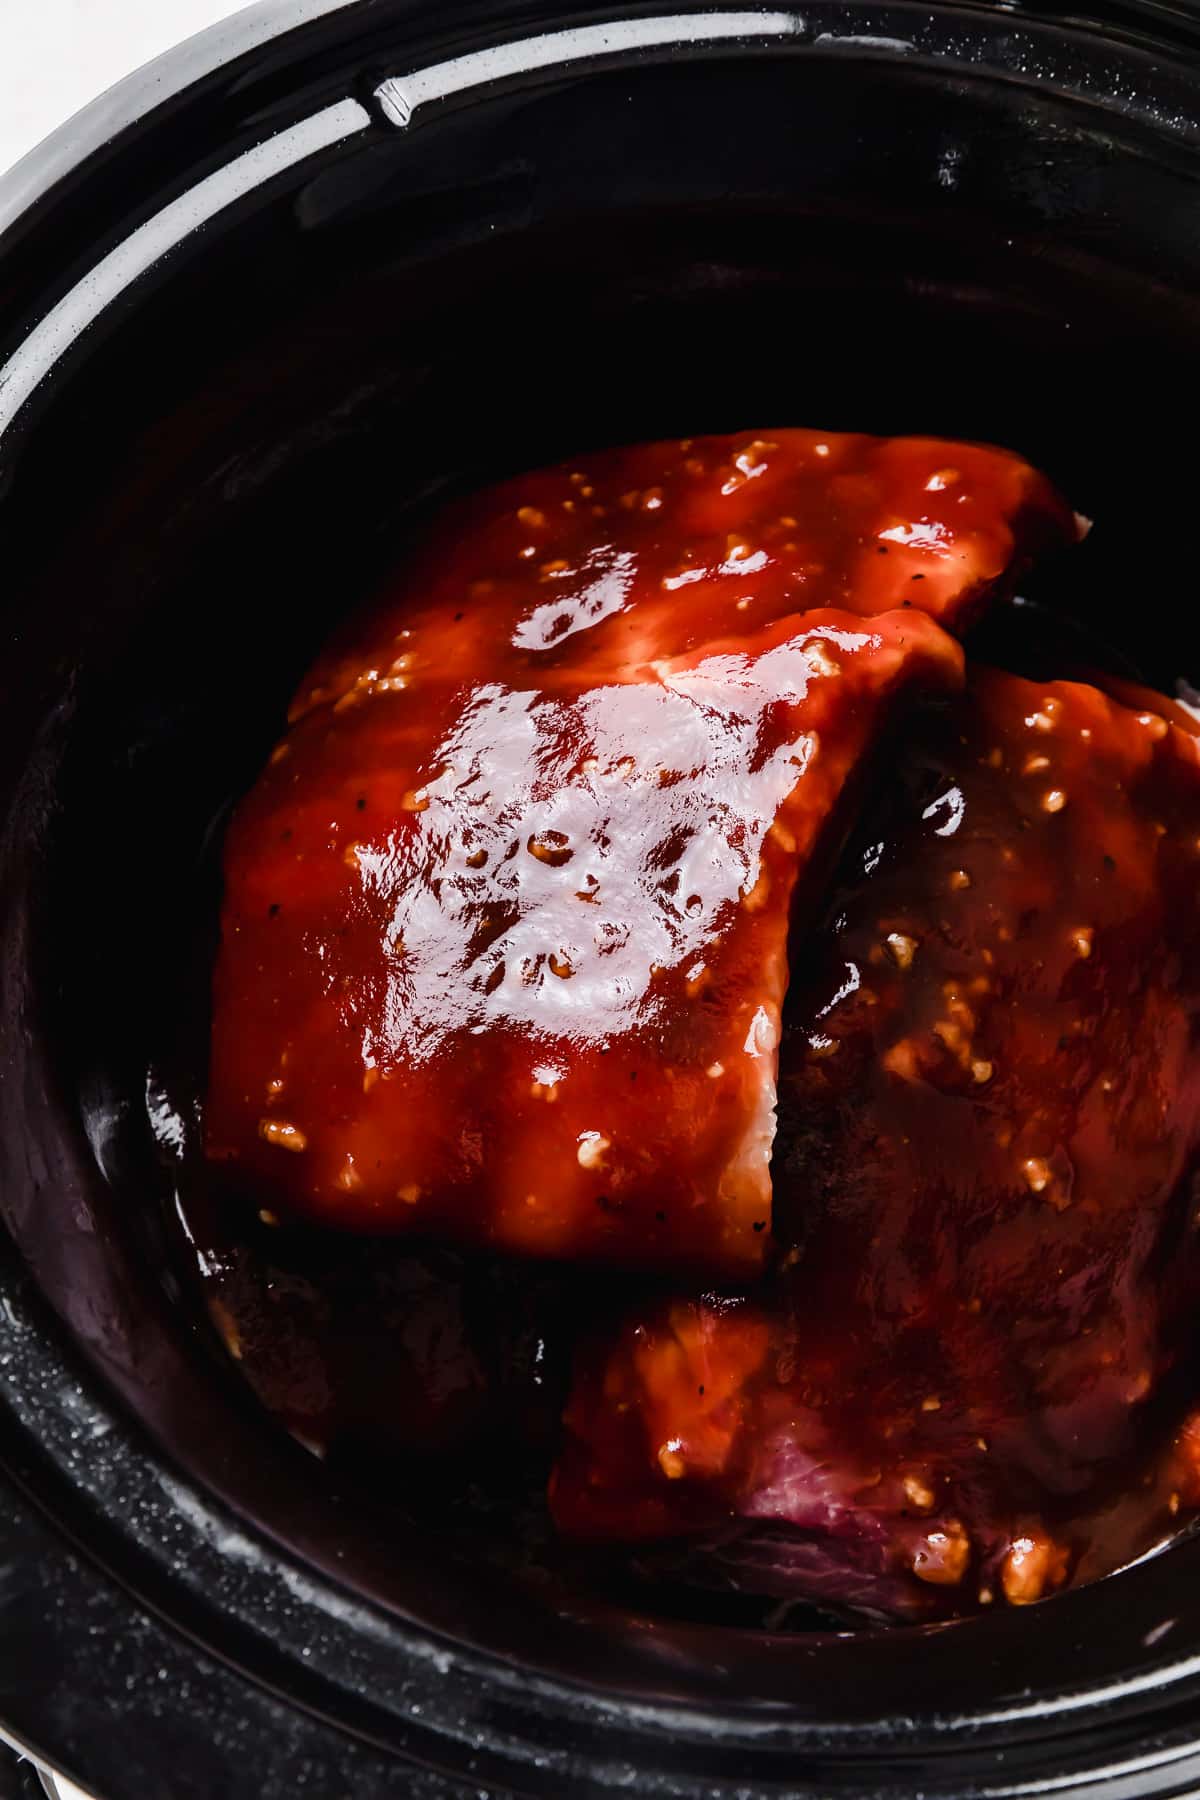 A dark brown and red colored sauce made with barbecue sauce and Coca Cola overtop ribs.